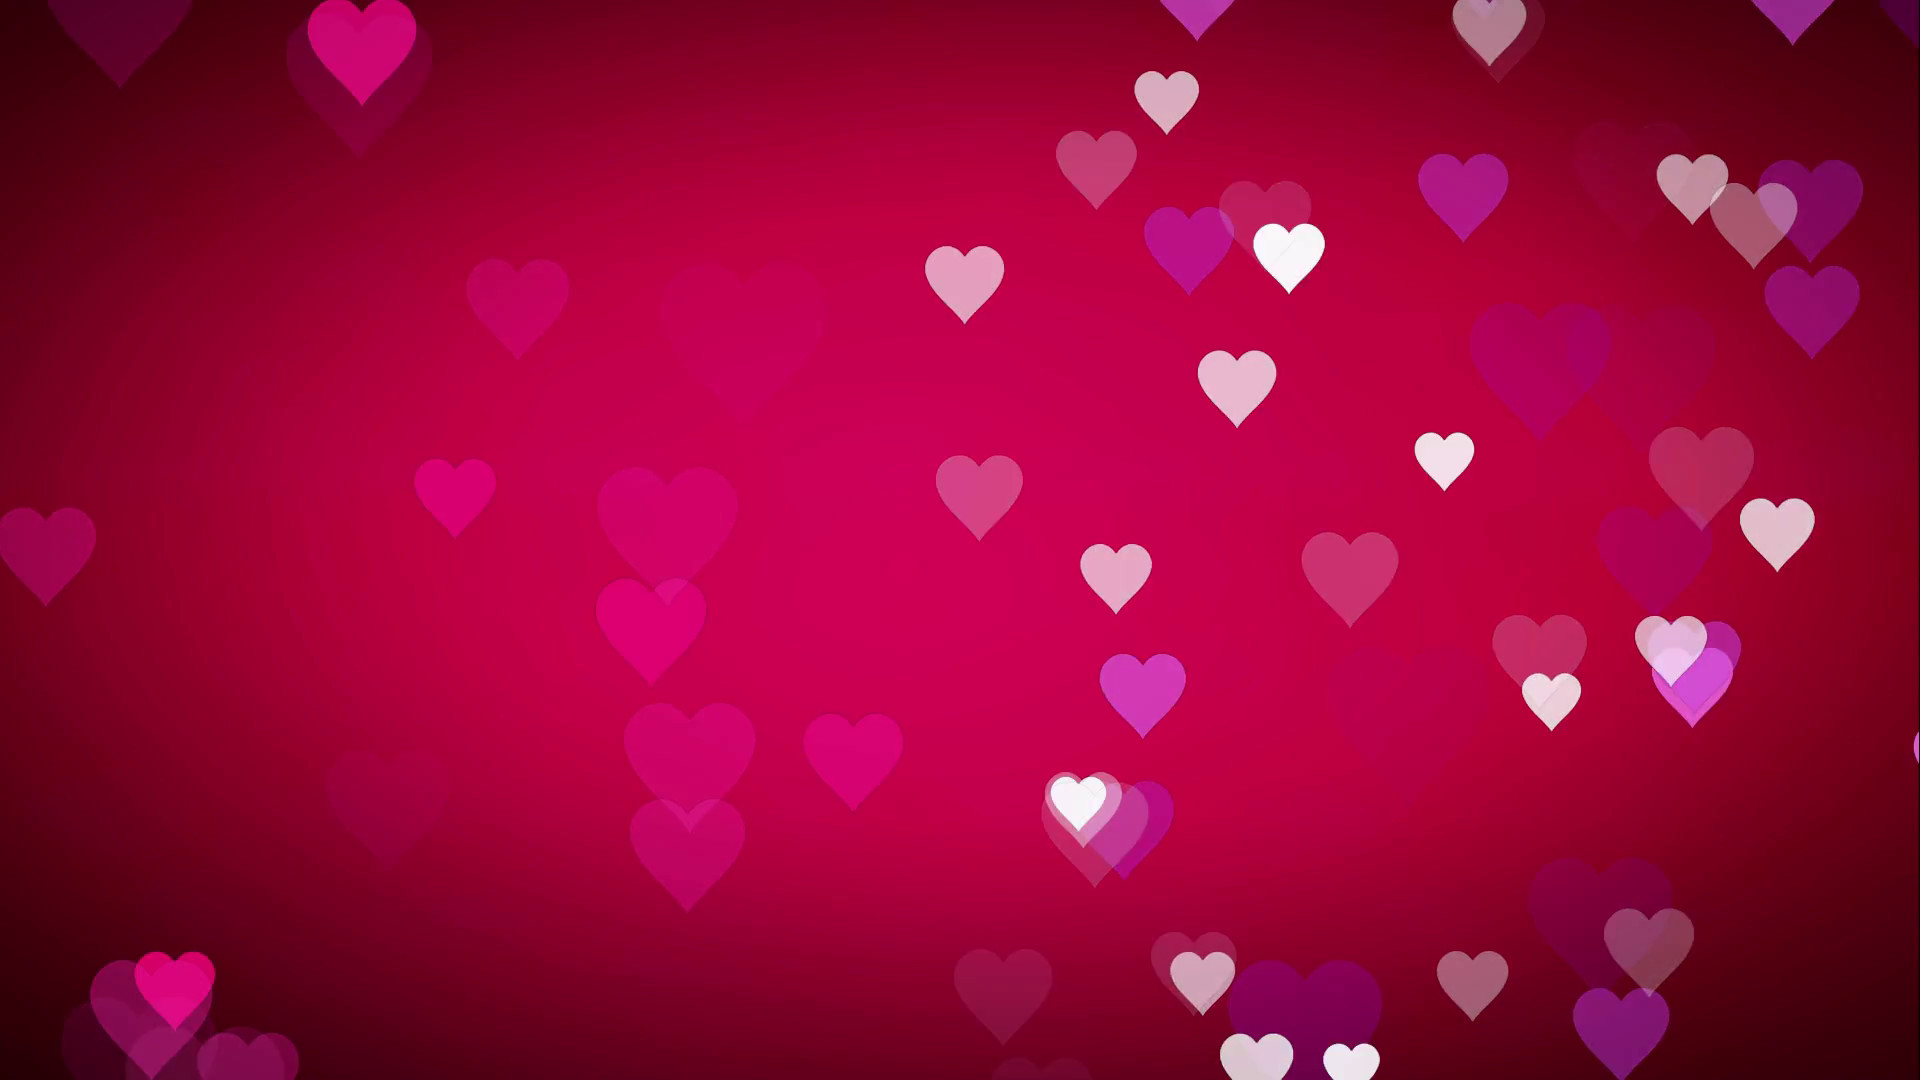 1920x1080 Animated many moving small pink purple white hearts on pink black background  useful greeting for wishing and celebrating valentine's day or emotion ...